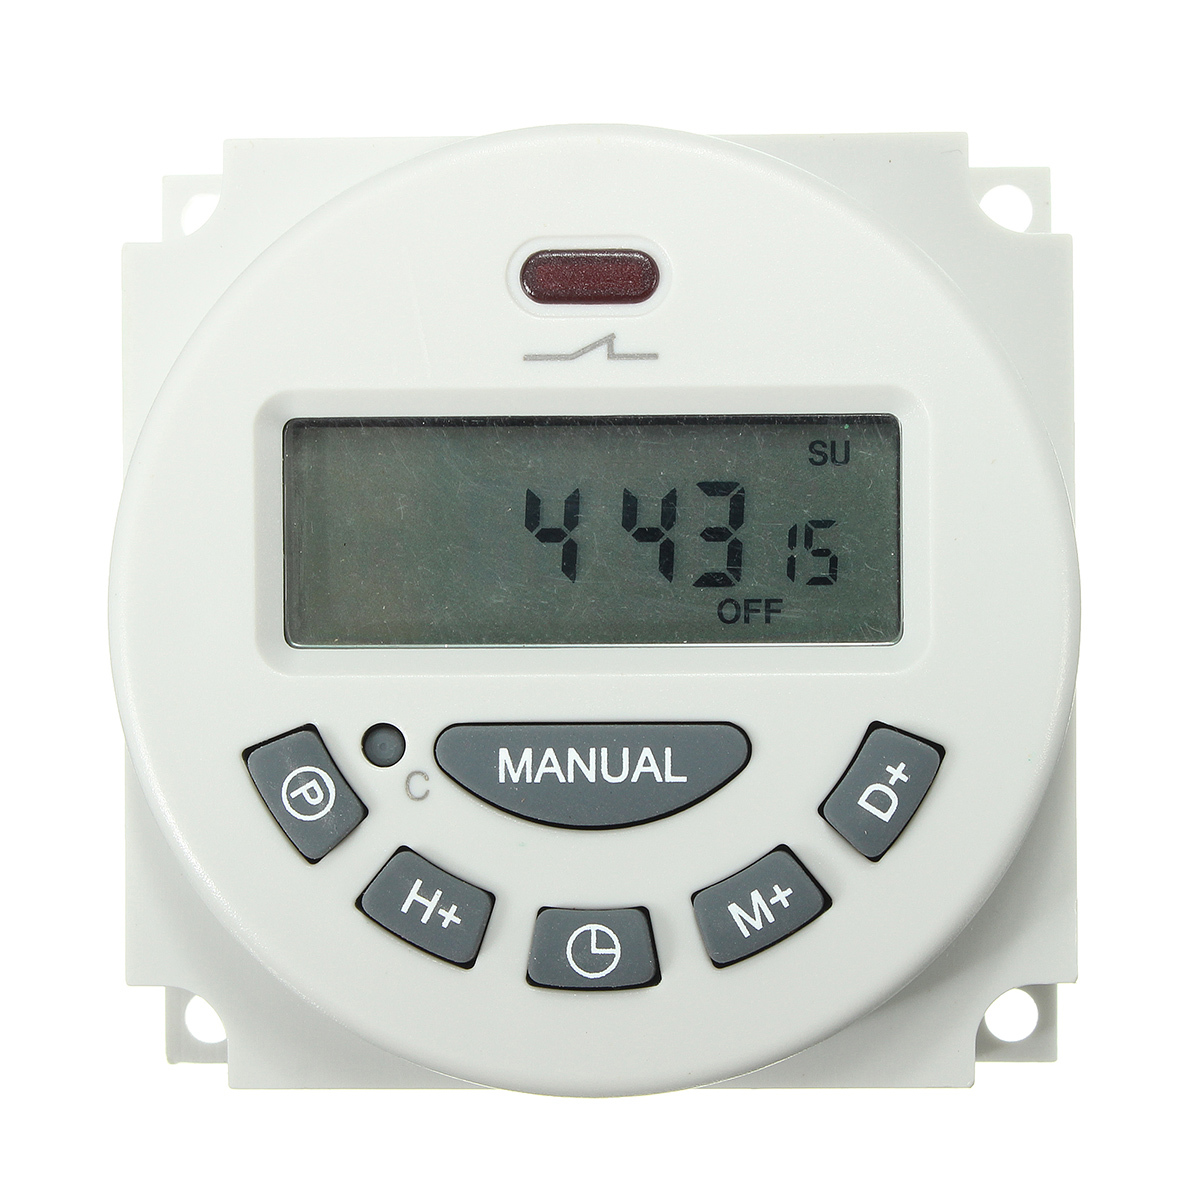 Excellway?® L701 12V/110V/220V LCD Digital Programmable Control Power Timer Switch Time Relay 2